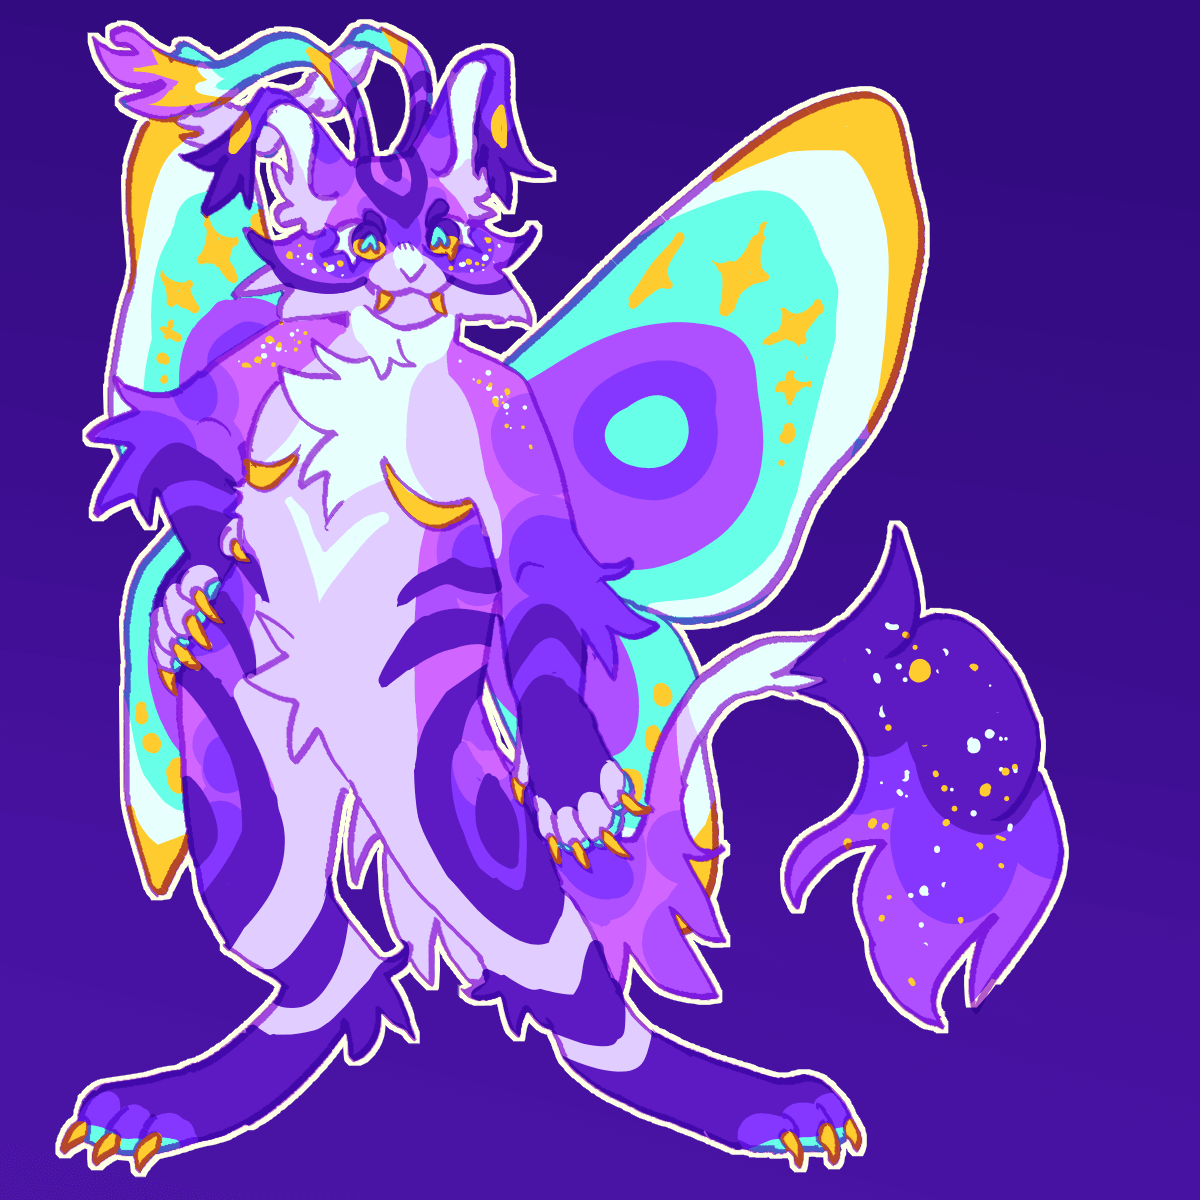 an anthro cat with moth wings and feelers. it has floppy ears, a fluffy tail tip, and top surgery scars. its color scheme is mostly purple with cyan and gold accents.